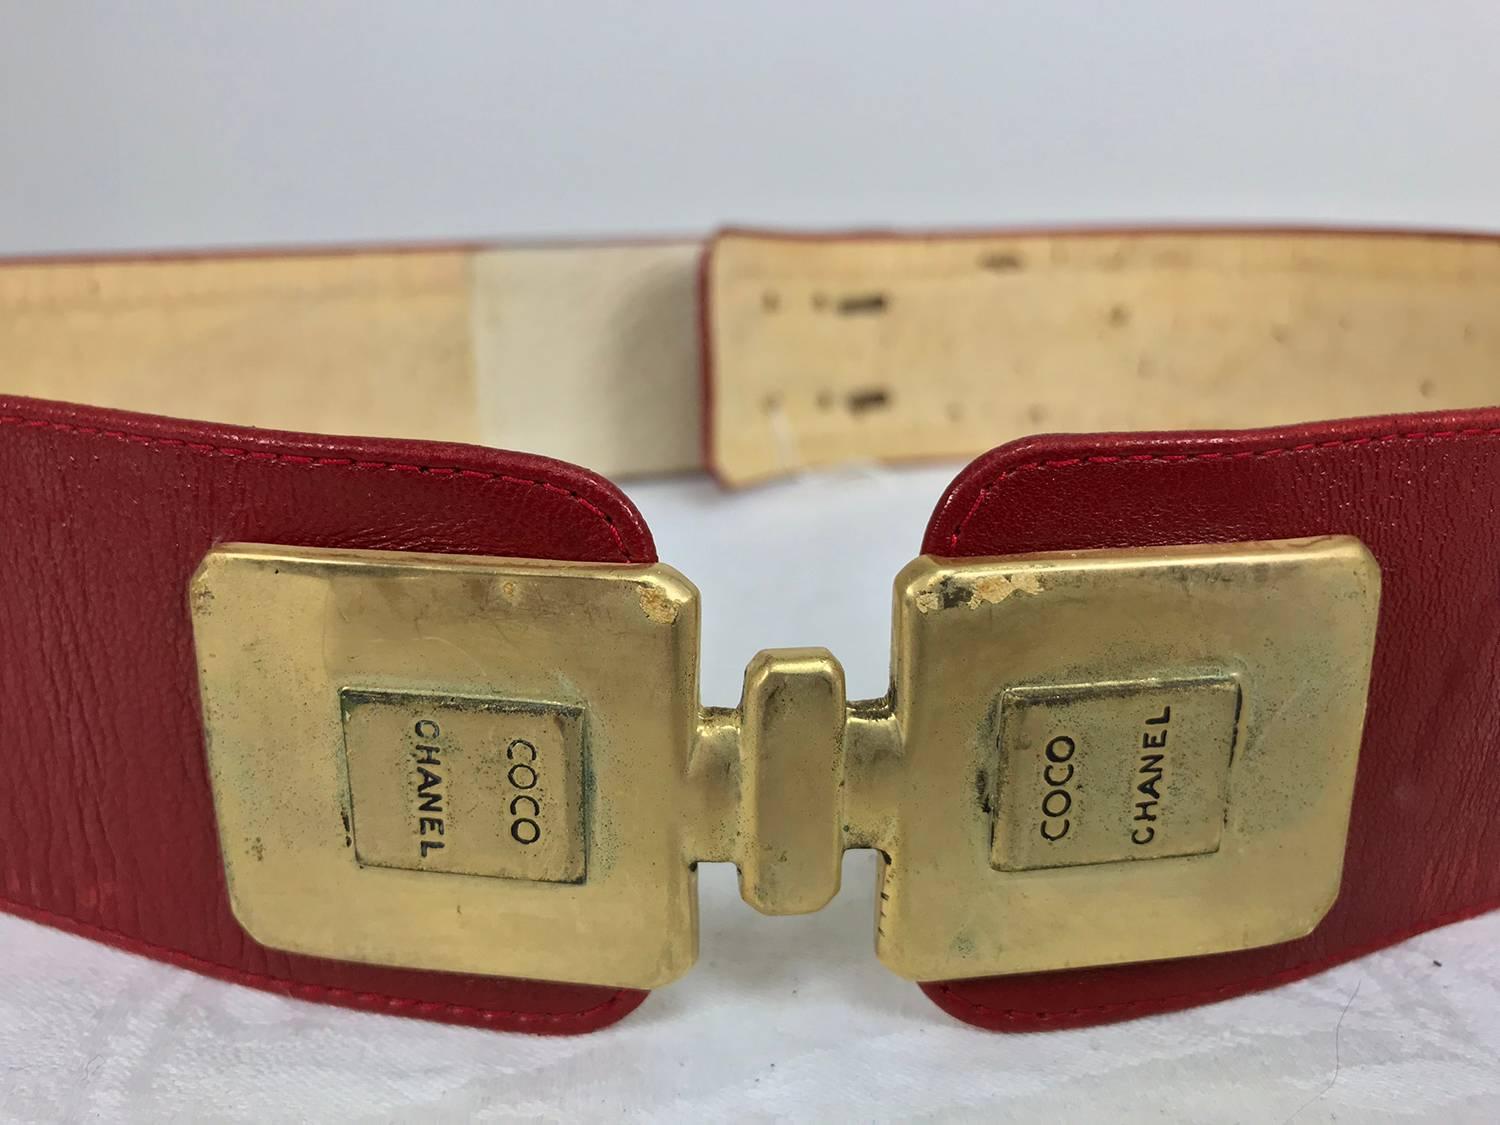 Chanel Coco gold bottles with red leather belt from the 1980s, possibly 1984, the year Coco perfume was introduced...Two gold perfume bottles of gold metal share a top to form the 